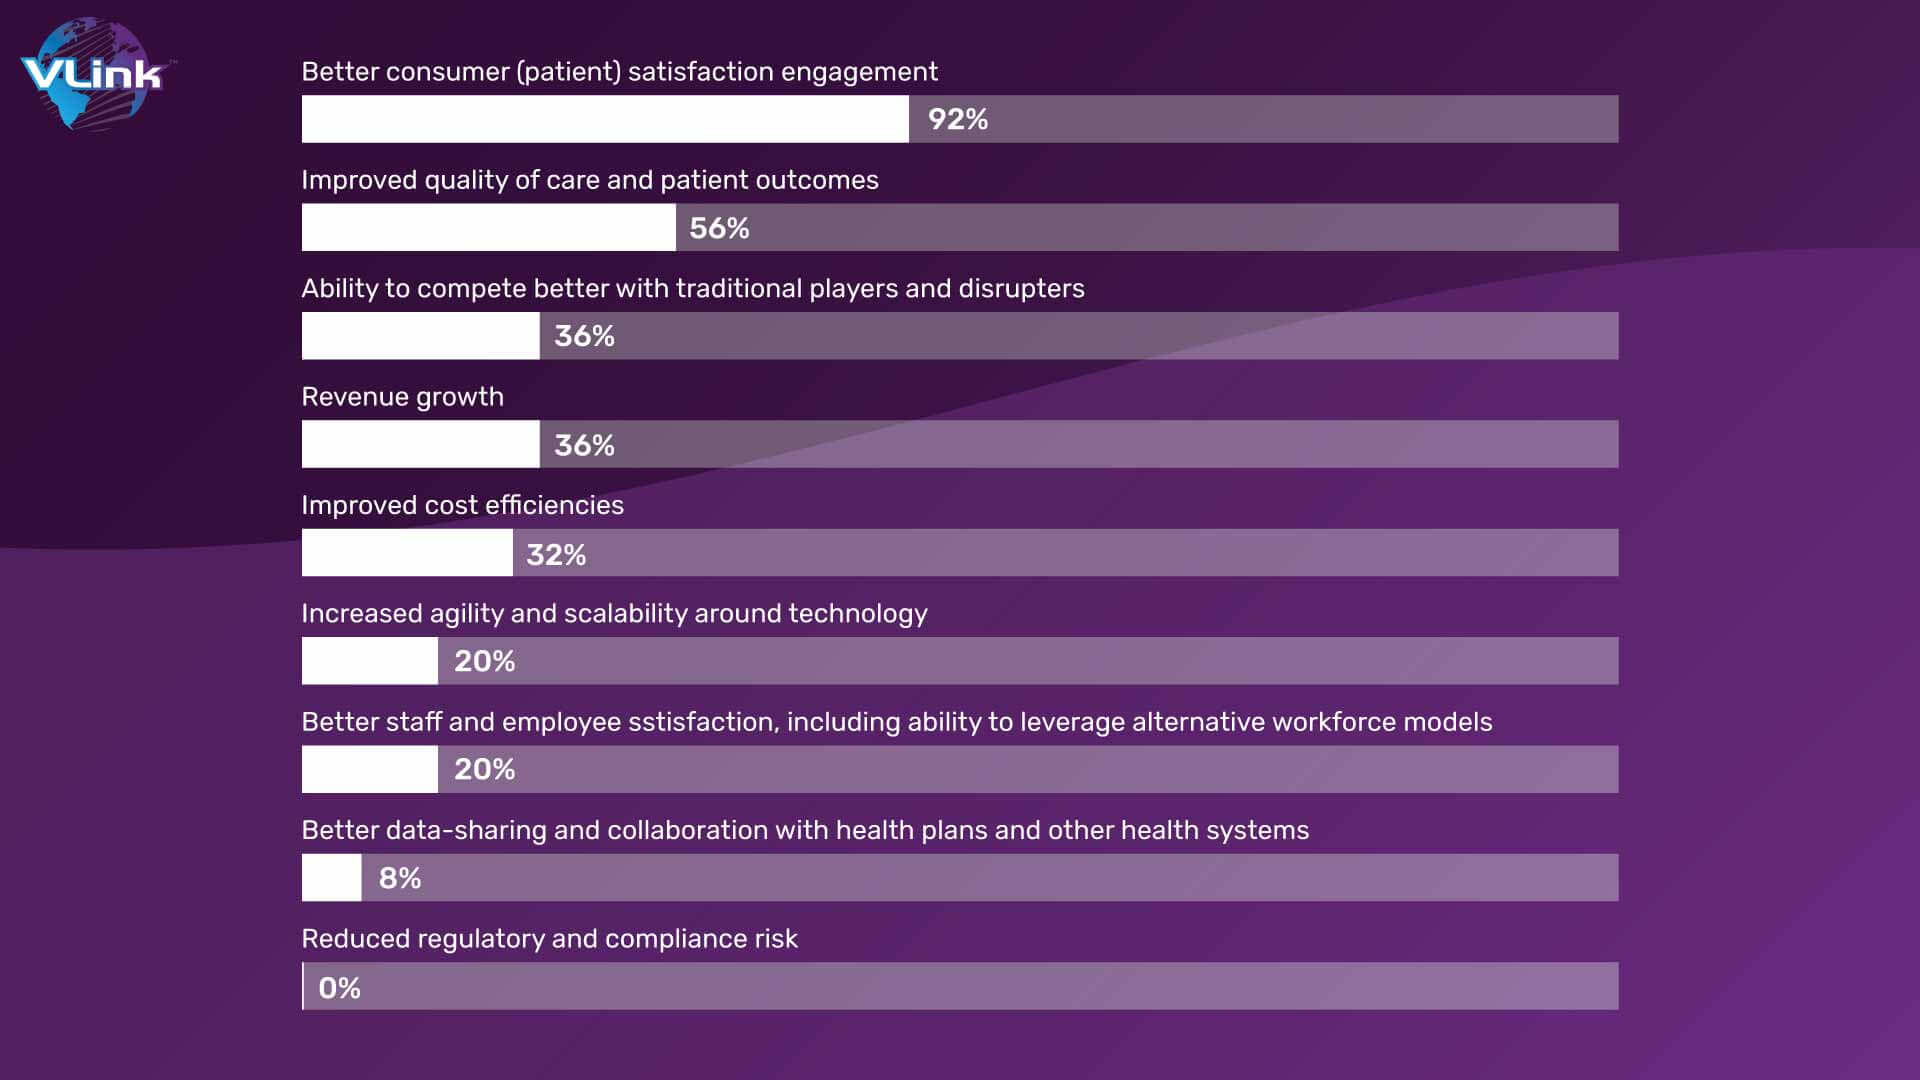 Benefits Digital Transformation Drive Innovation In the Healthcare Industry